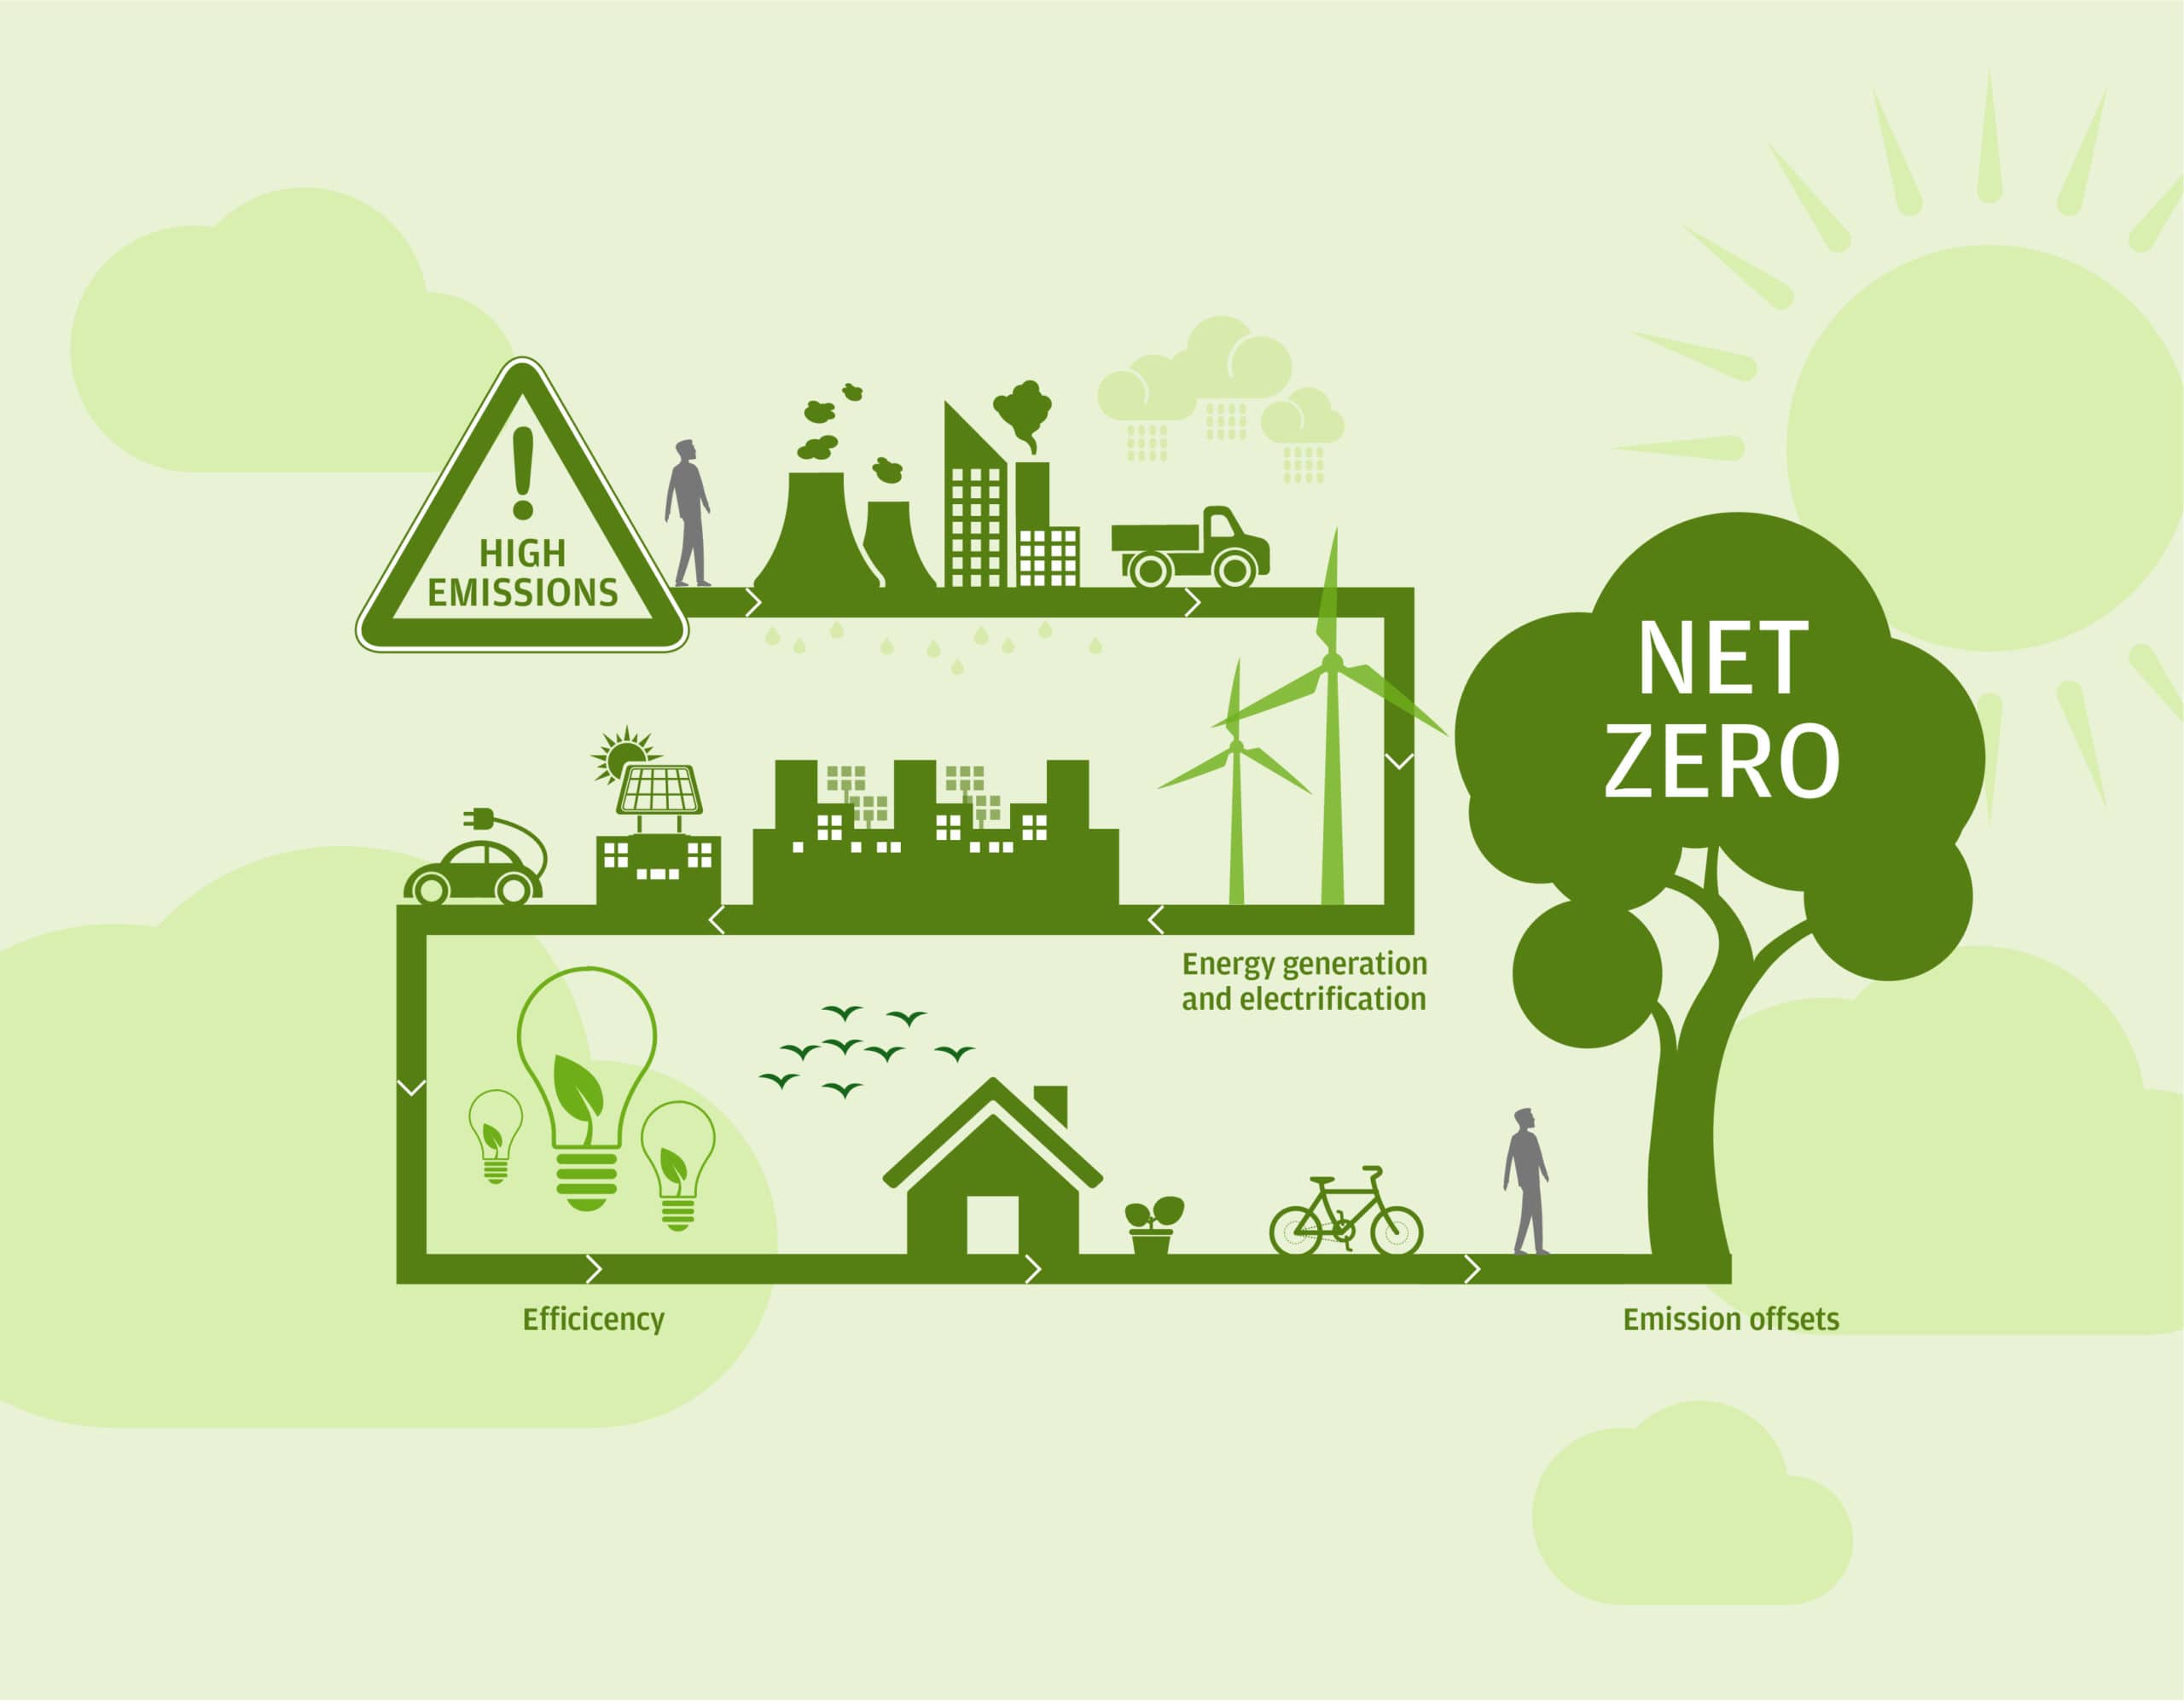 NetZero by 2050 Humanity's Best Bet Against Climate Change